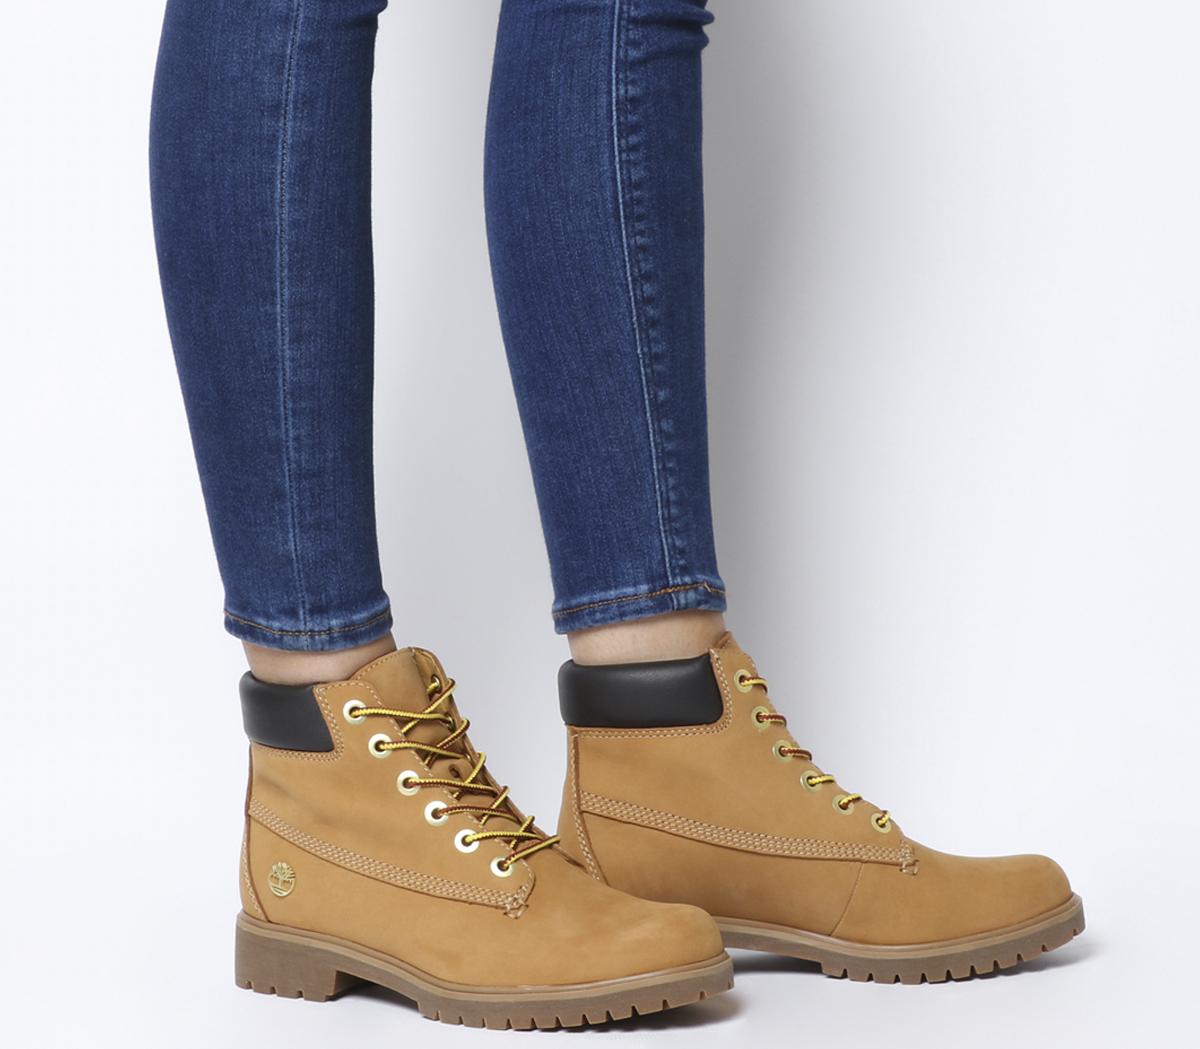 Timberland Slim Premium 6 Inch Boots Wheat - Ankle Boots